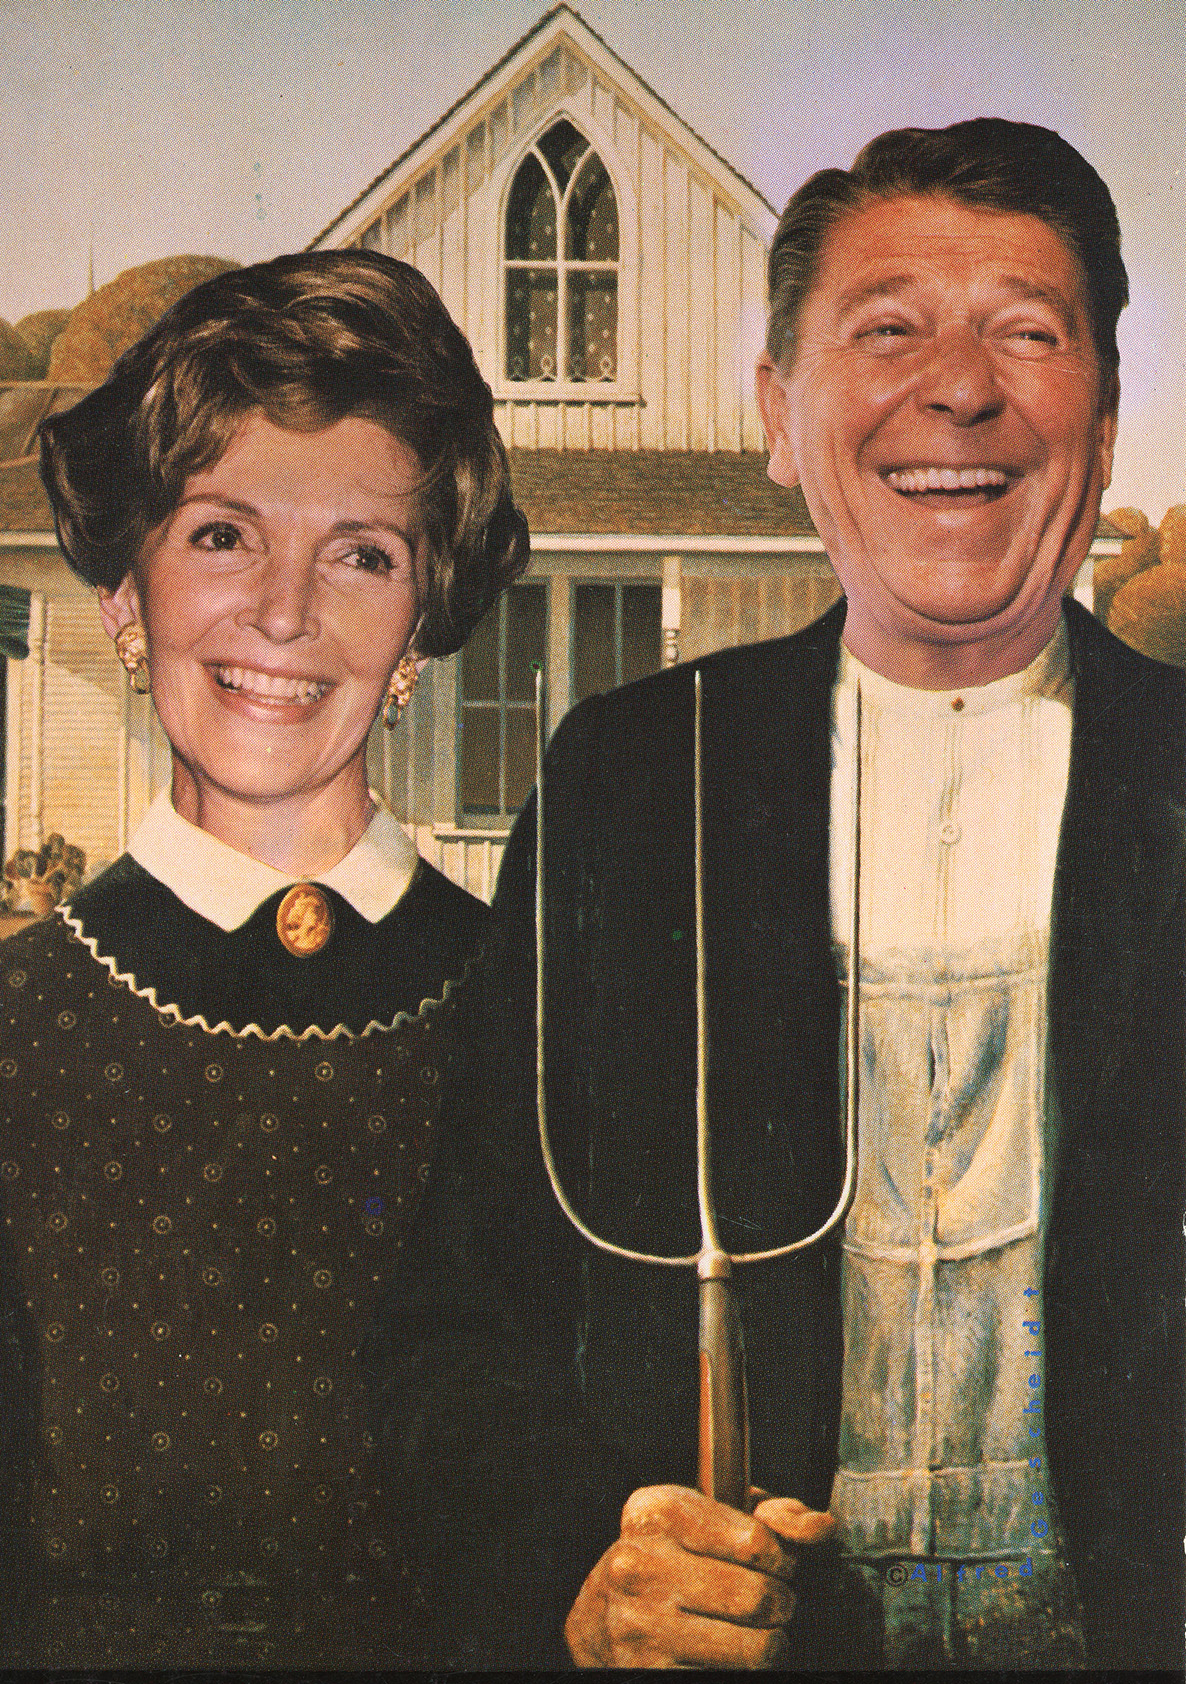 American Gothic Postcard with President Reagan and Nancy Reagan likenesses